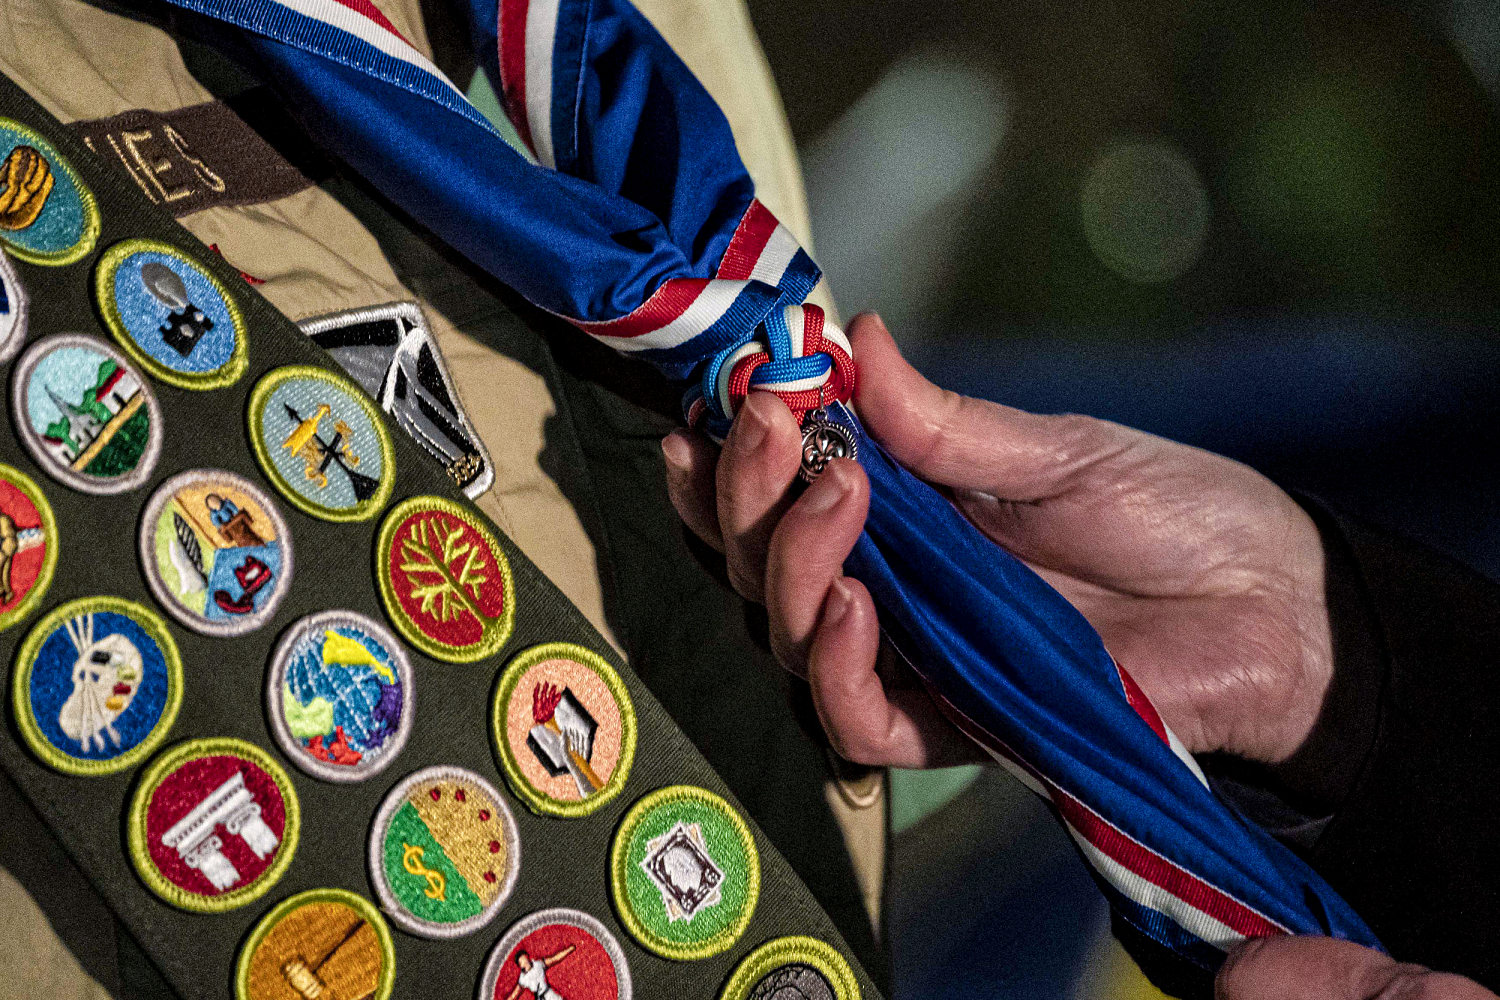 I’m an Eagle Scout. A new name won't change what the Boy Scouts did.